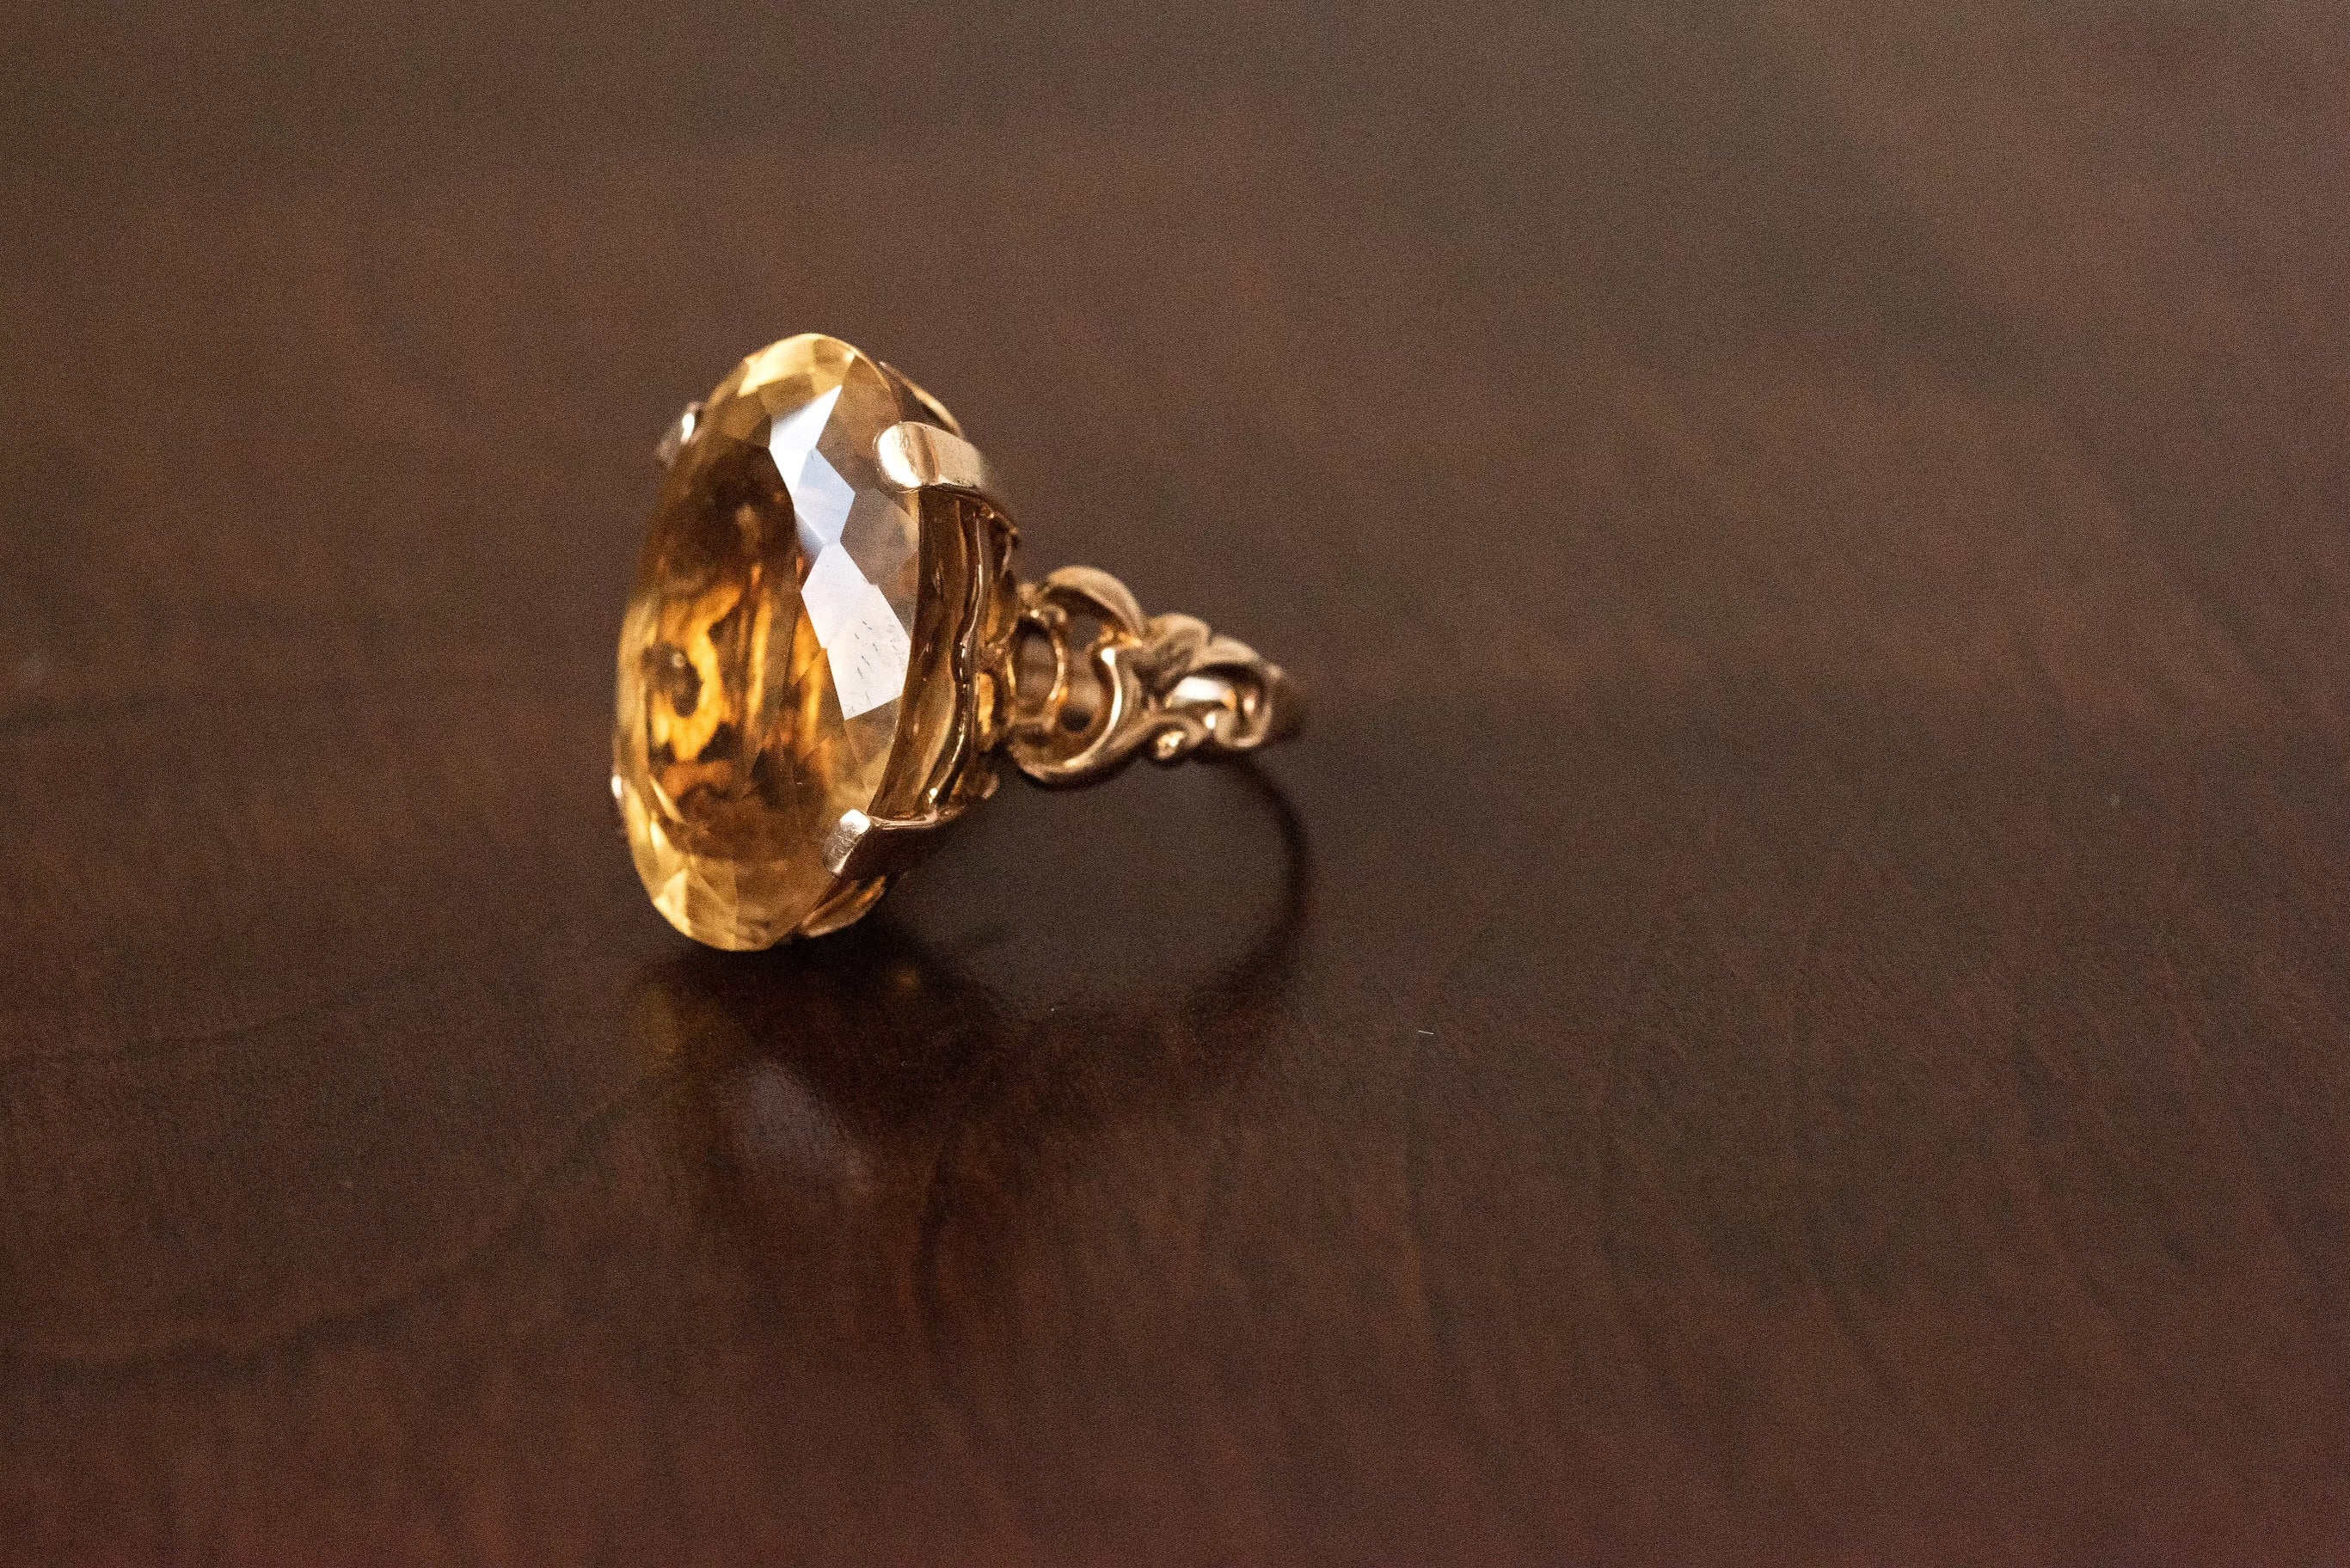 26ct oval sunflower colour citrine ring set in 10k yellow gold. The yellow of the citrine sparkles when it hits light. It is cut the old fashion way to let in lots of light and highlight the beauty of the stone. The colour is so uplifting and draws